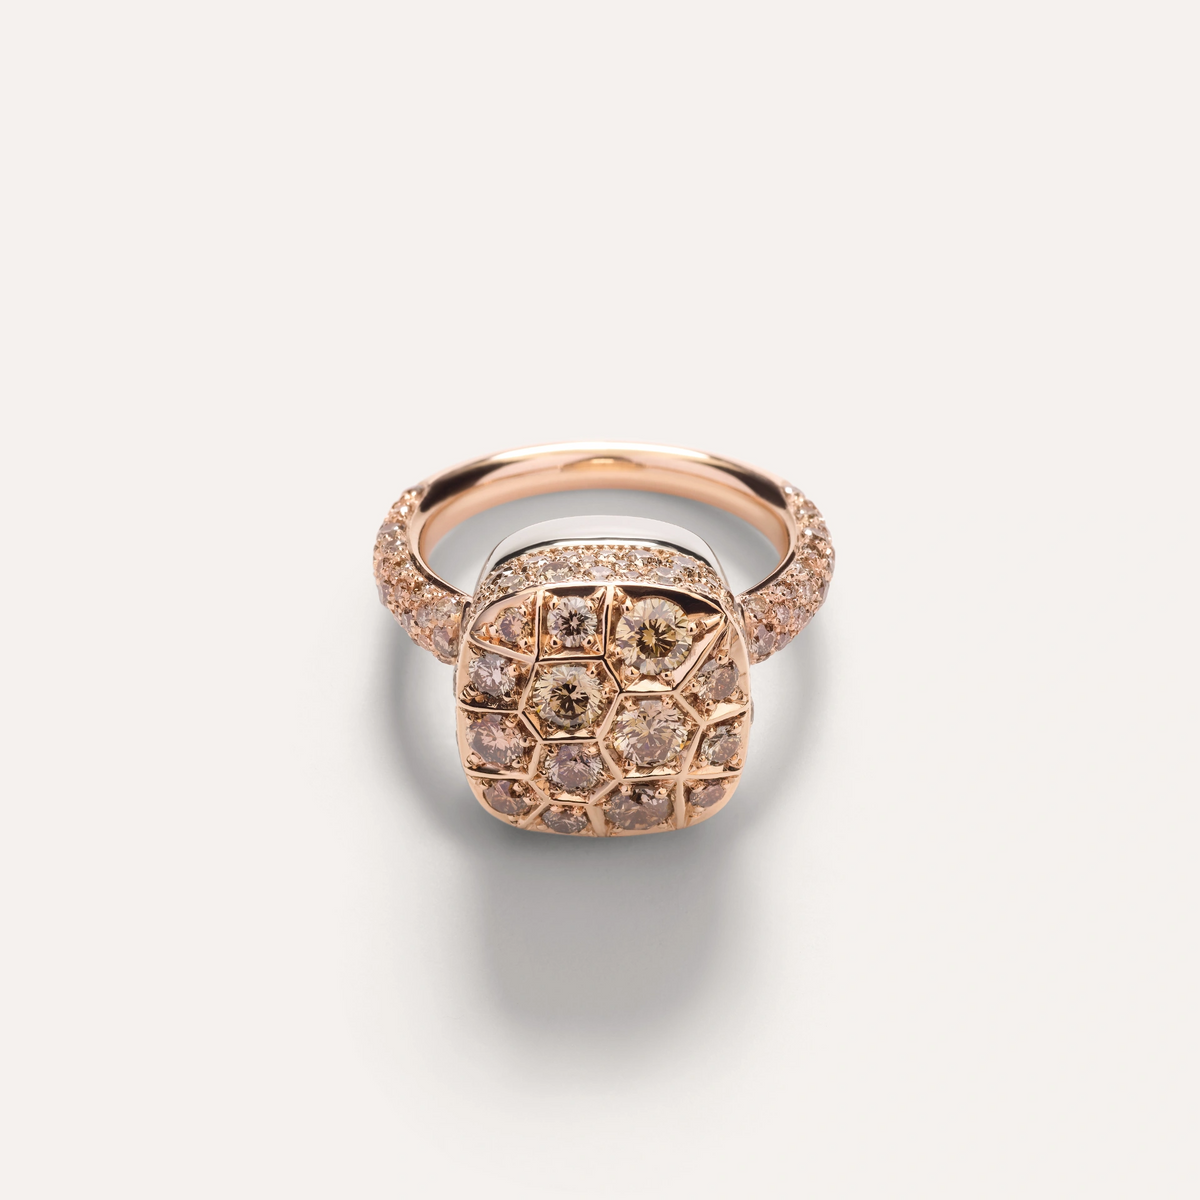 Top Down View Nudo Assoluto Ring with Brown Diamonds in 18k Gold